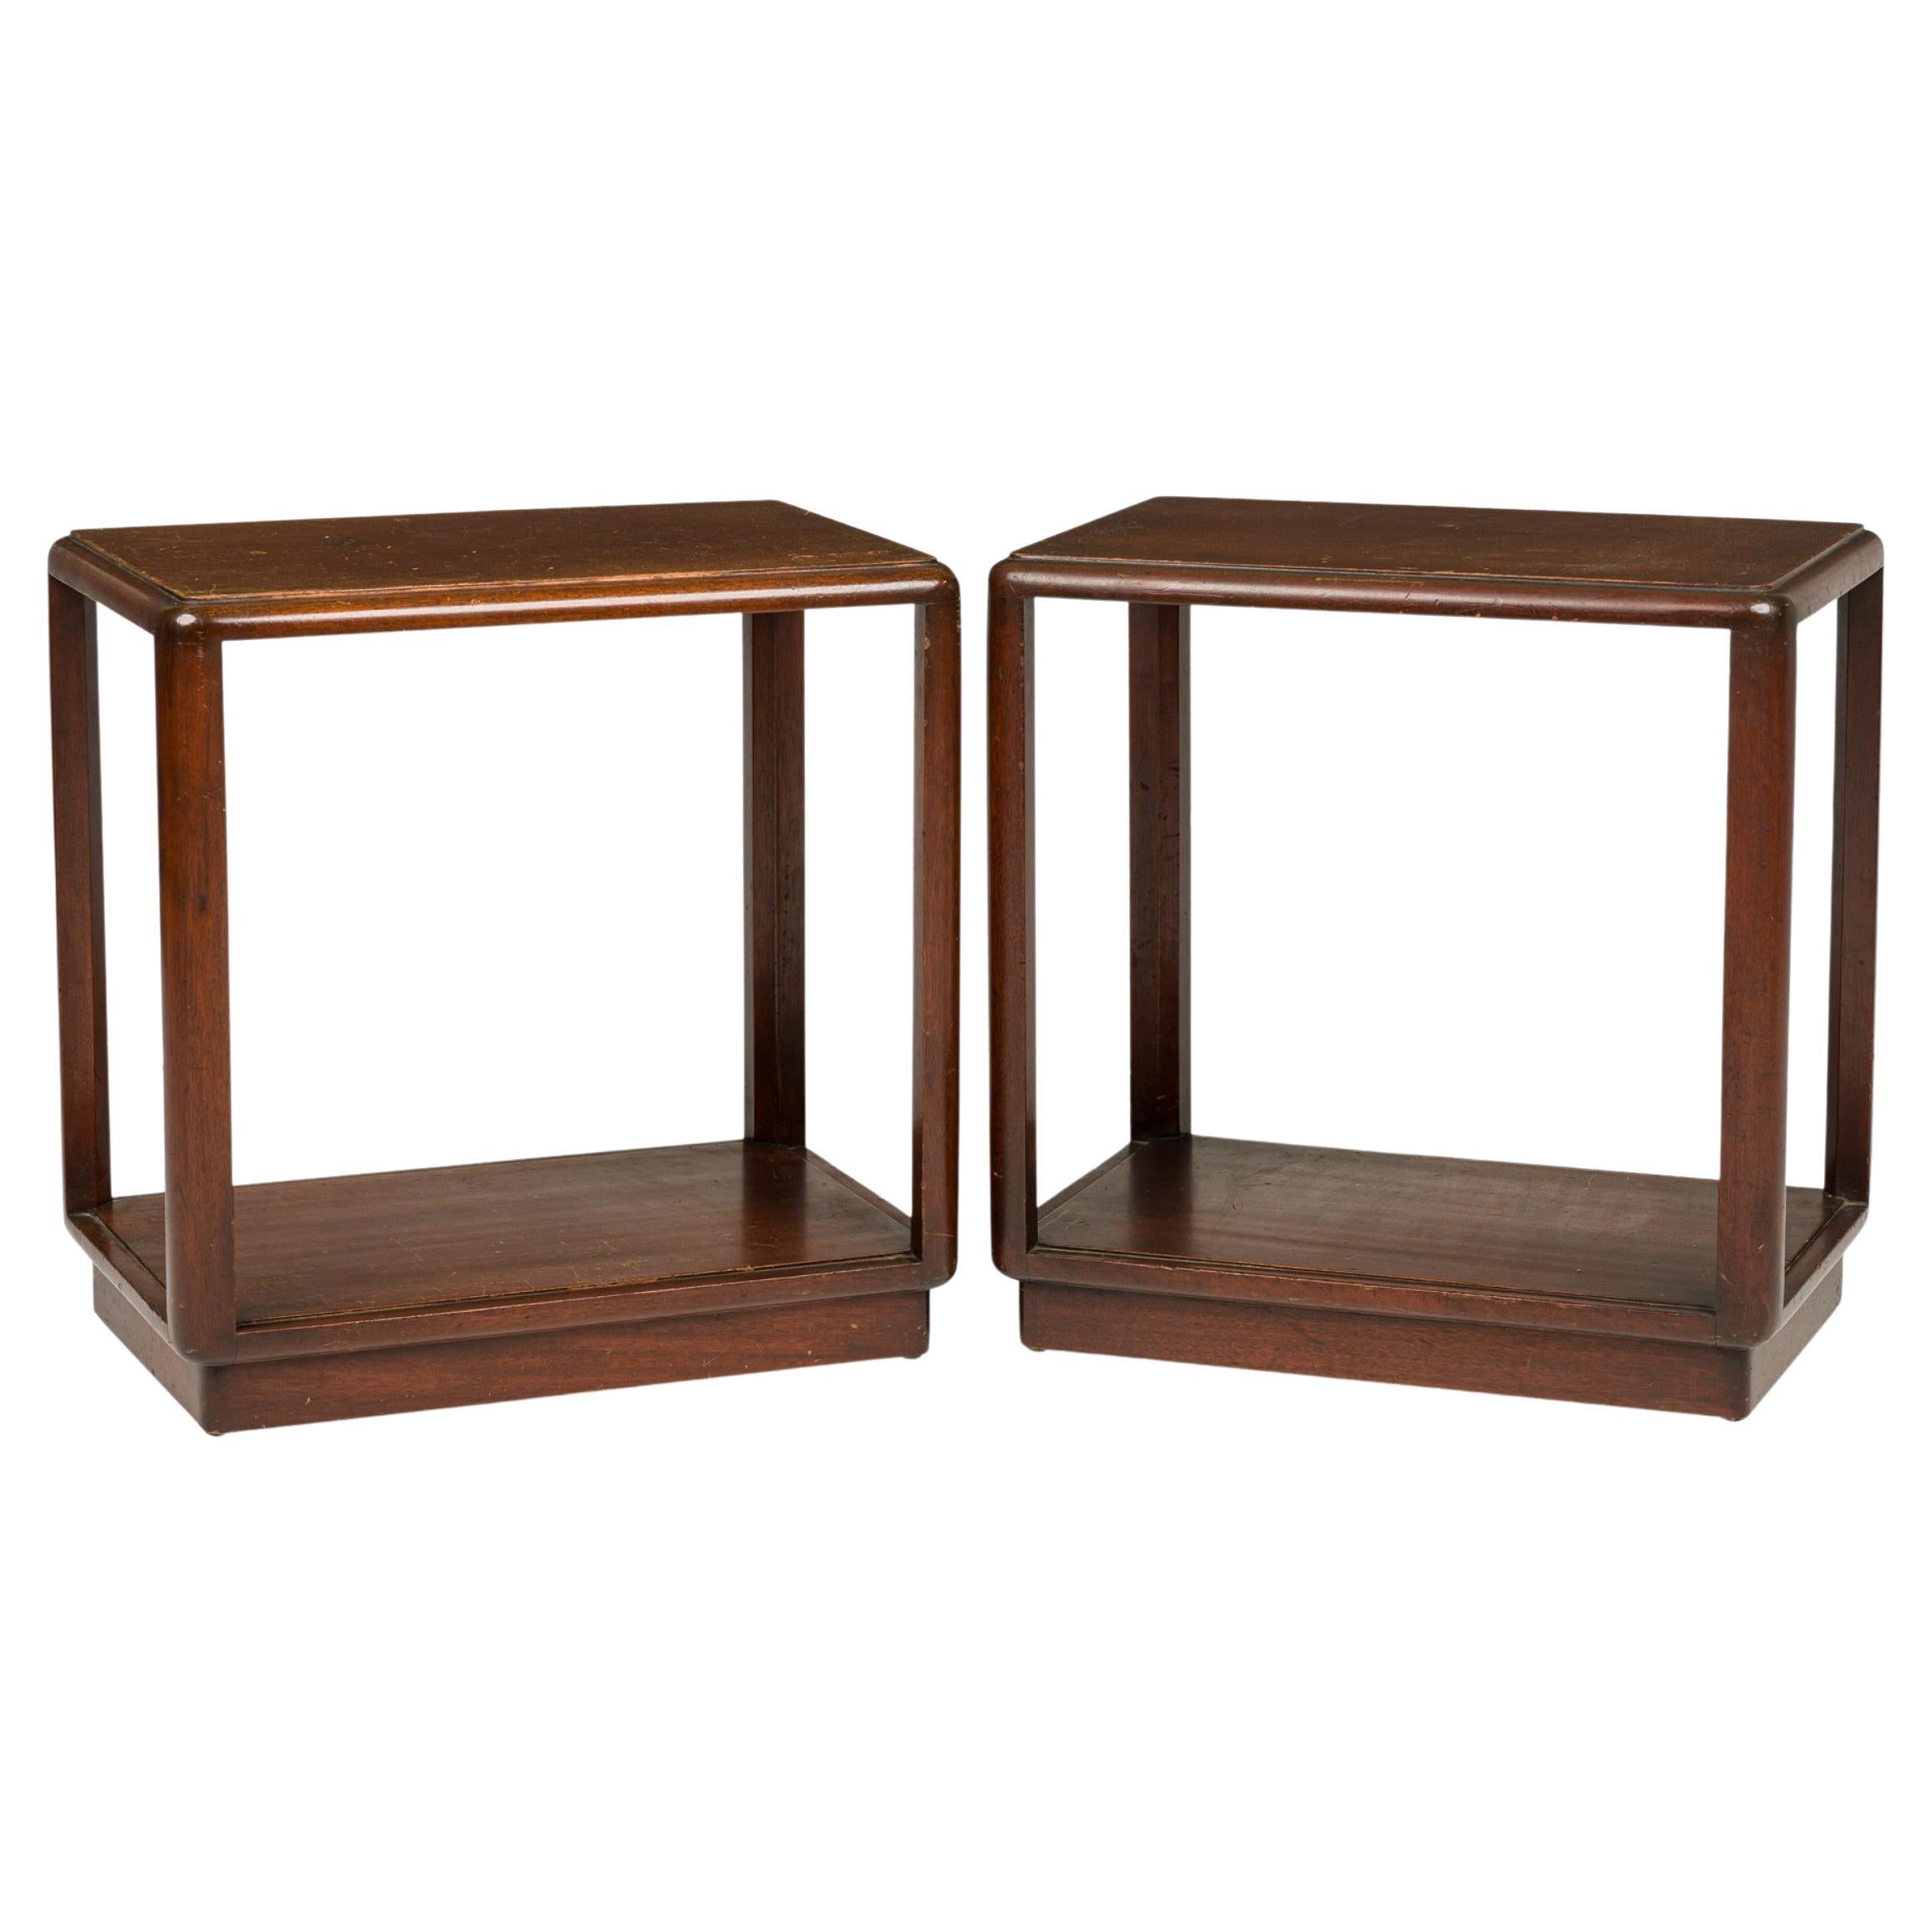 Pair of Edward Wormley for Dunbar Dark Wooden Open Frame End / Side Tables